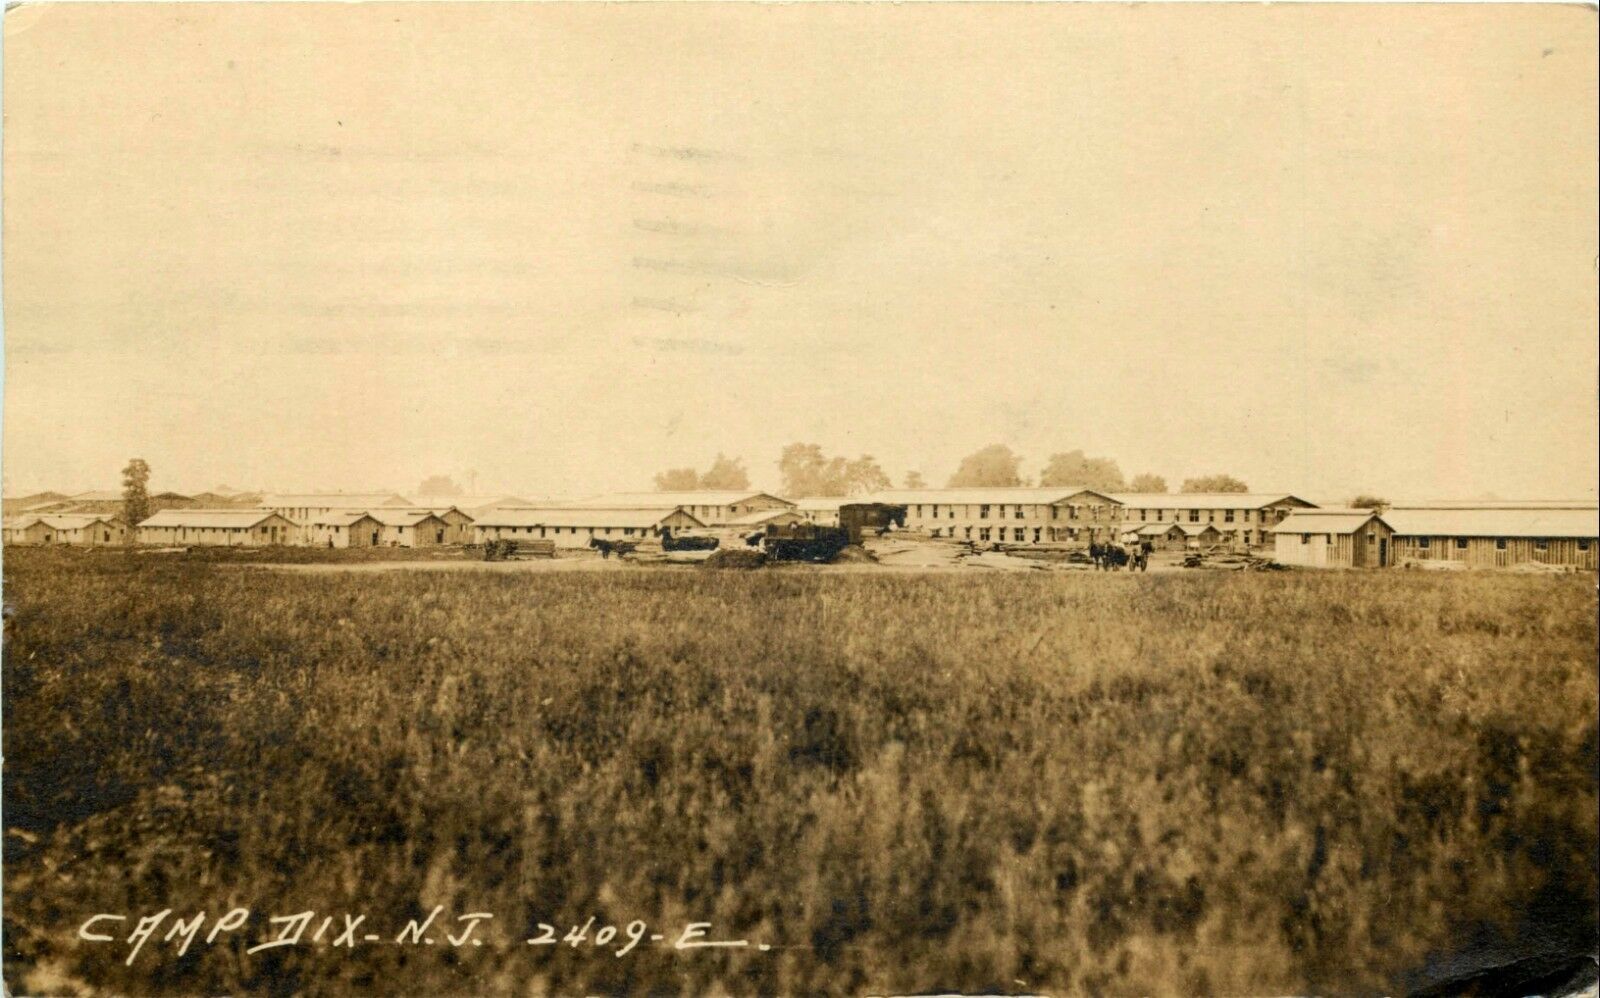 Camp Dix - Distant view of the Barracks and other buildings - 1917